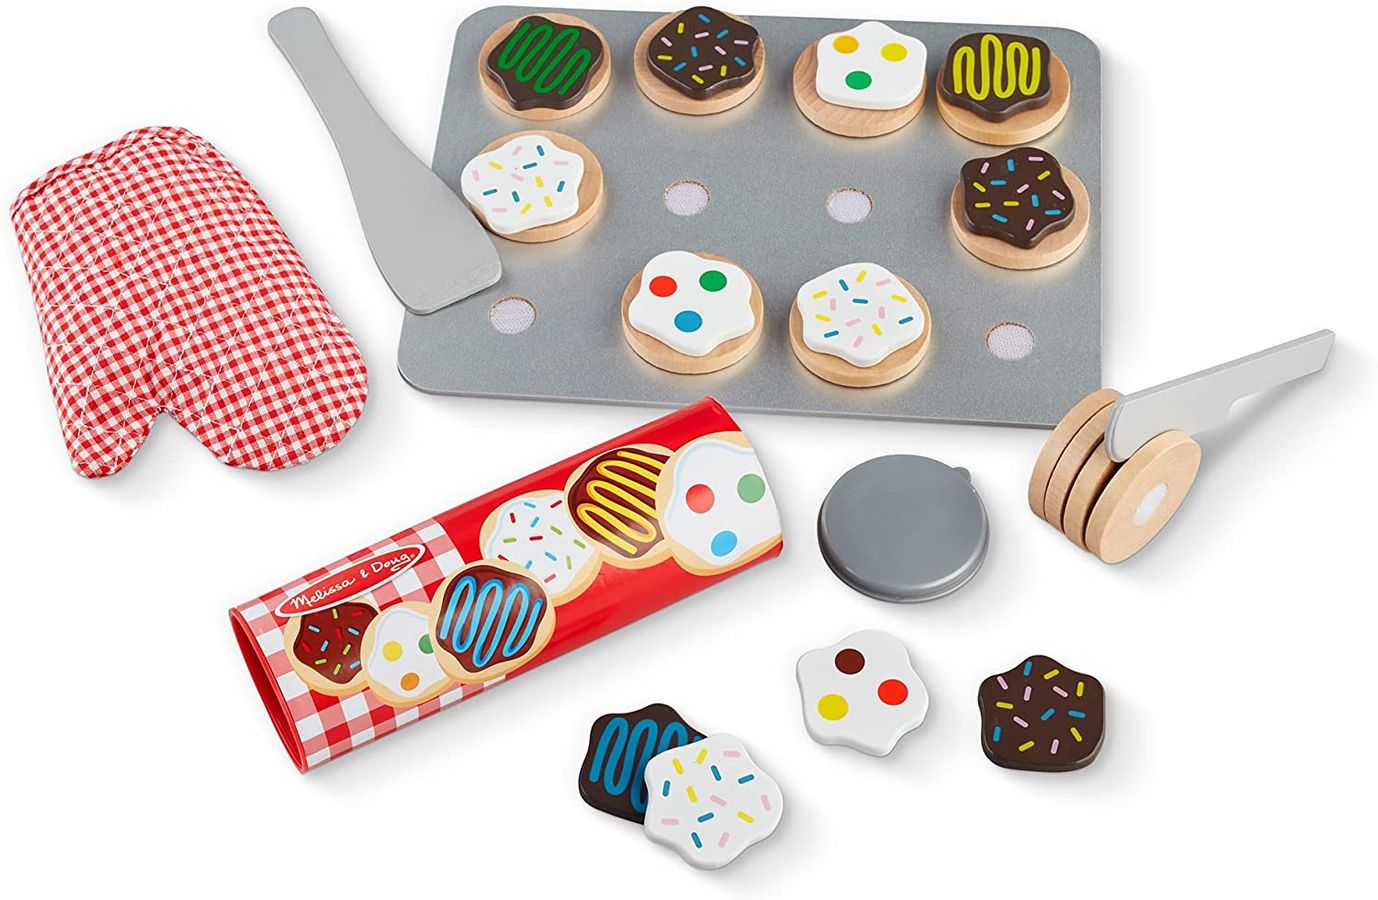 MILLIE P'S Quilter's Baking Boa Kit - Adorable Kitchen